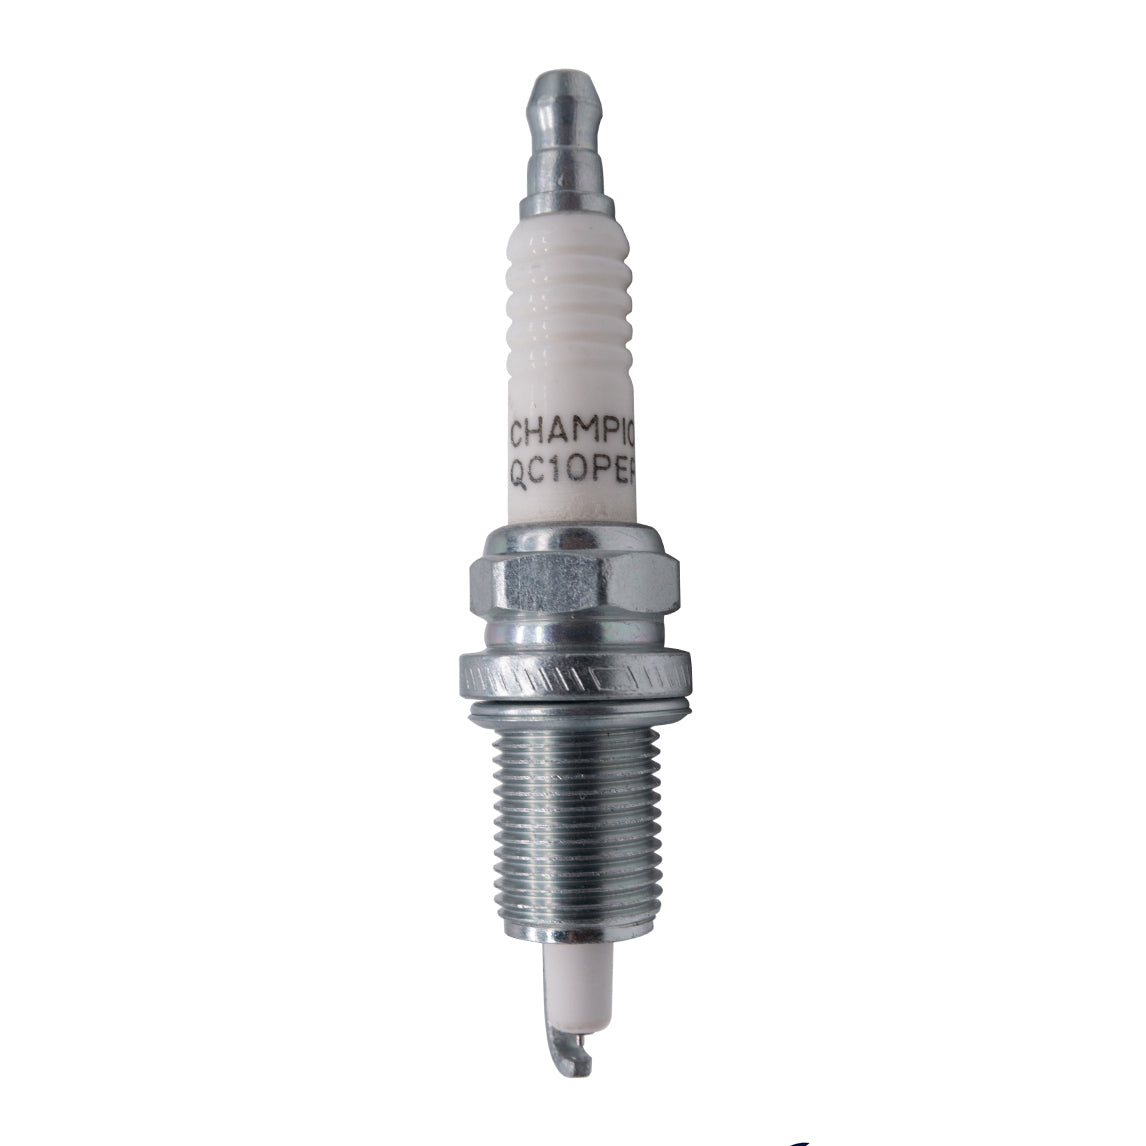 This is a Champion 7919 QC10PEPB Spark Plug for Evinrude ETEC 2-Stroke outboard motors (5006308).